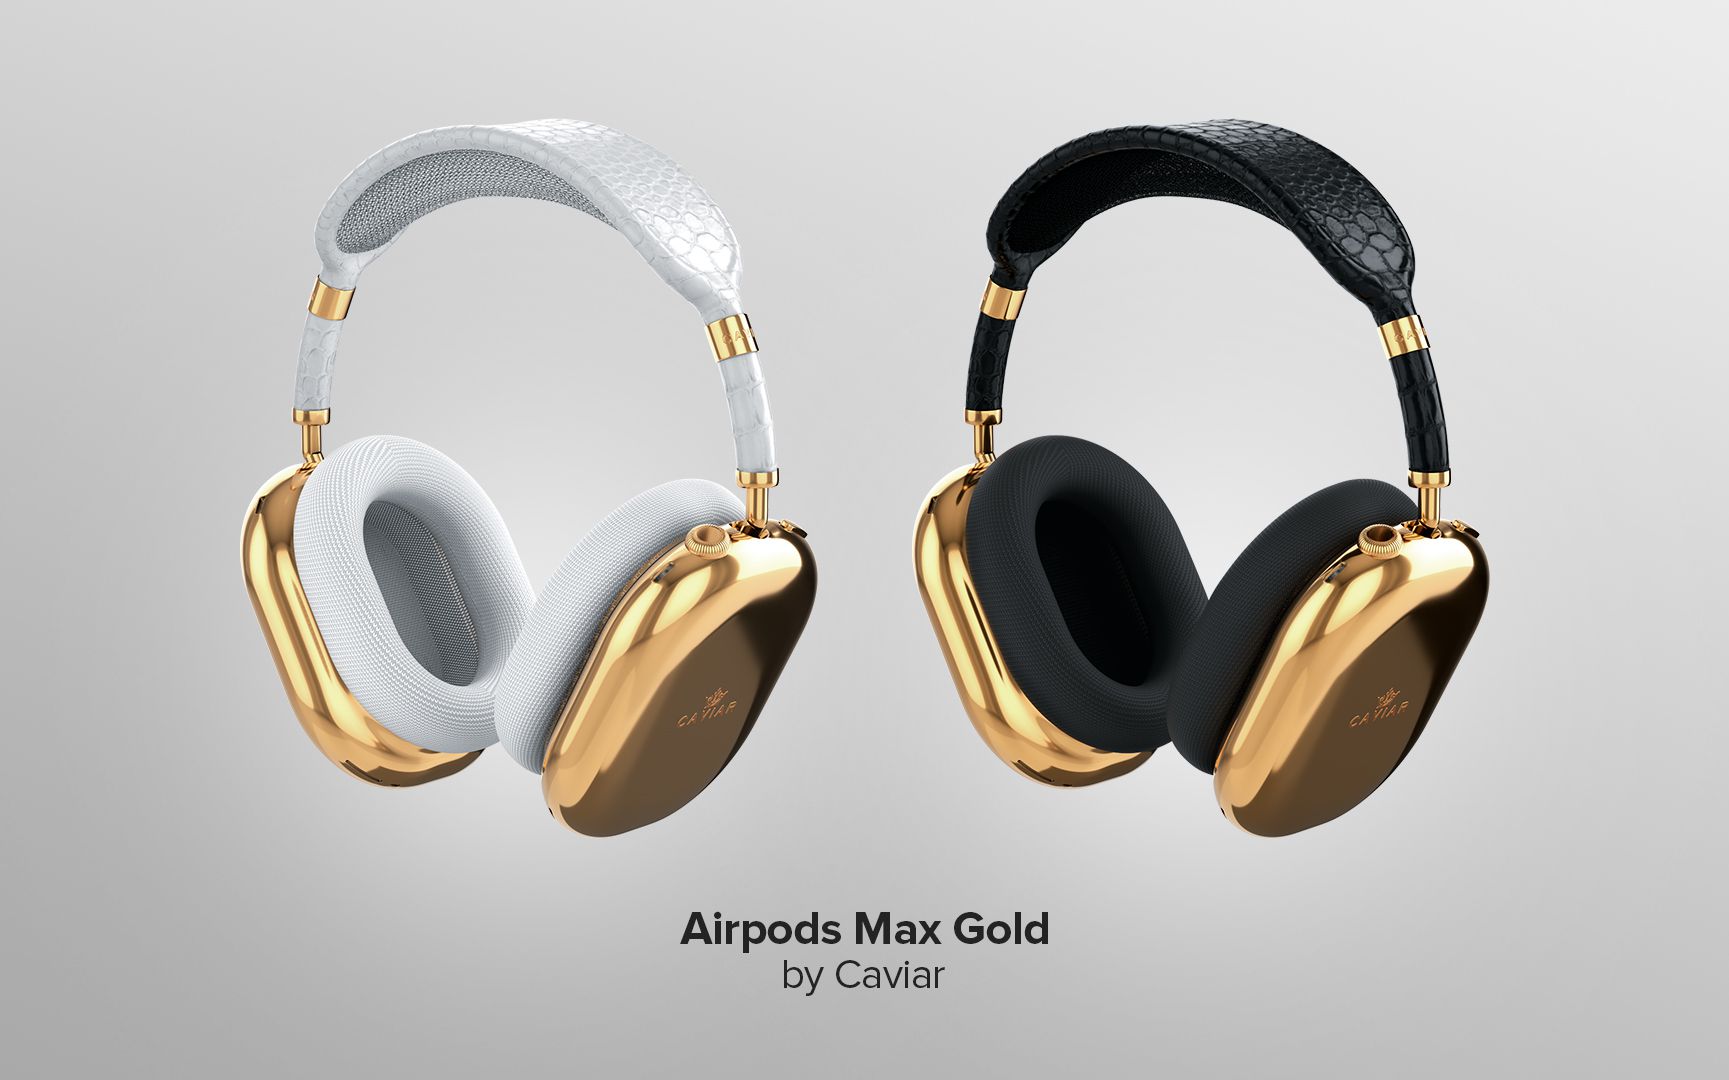 Caviar introduces custom AirPods Max “Pure Gold” for $ 108,000